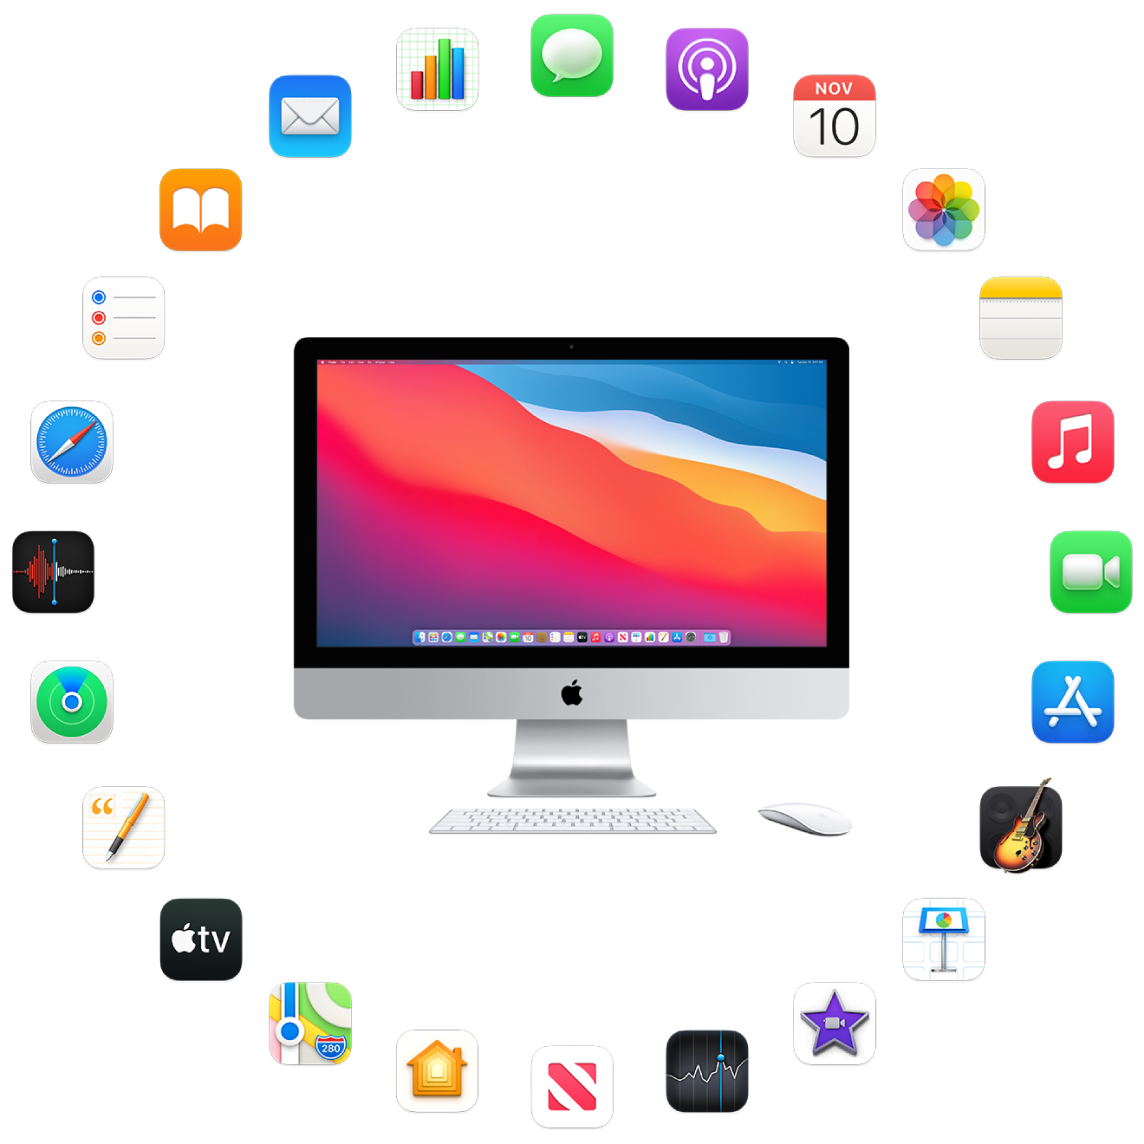 An iMac surrounded by the icons for the built-in apps described in the following sections.